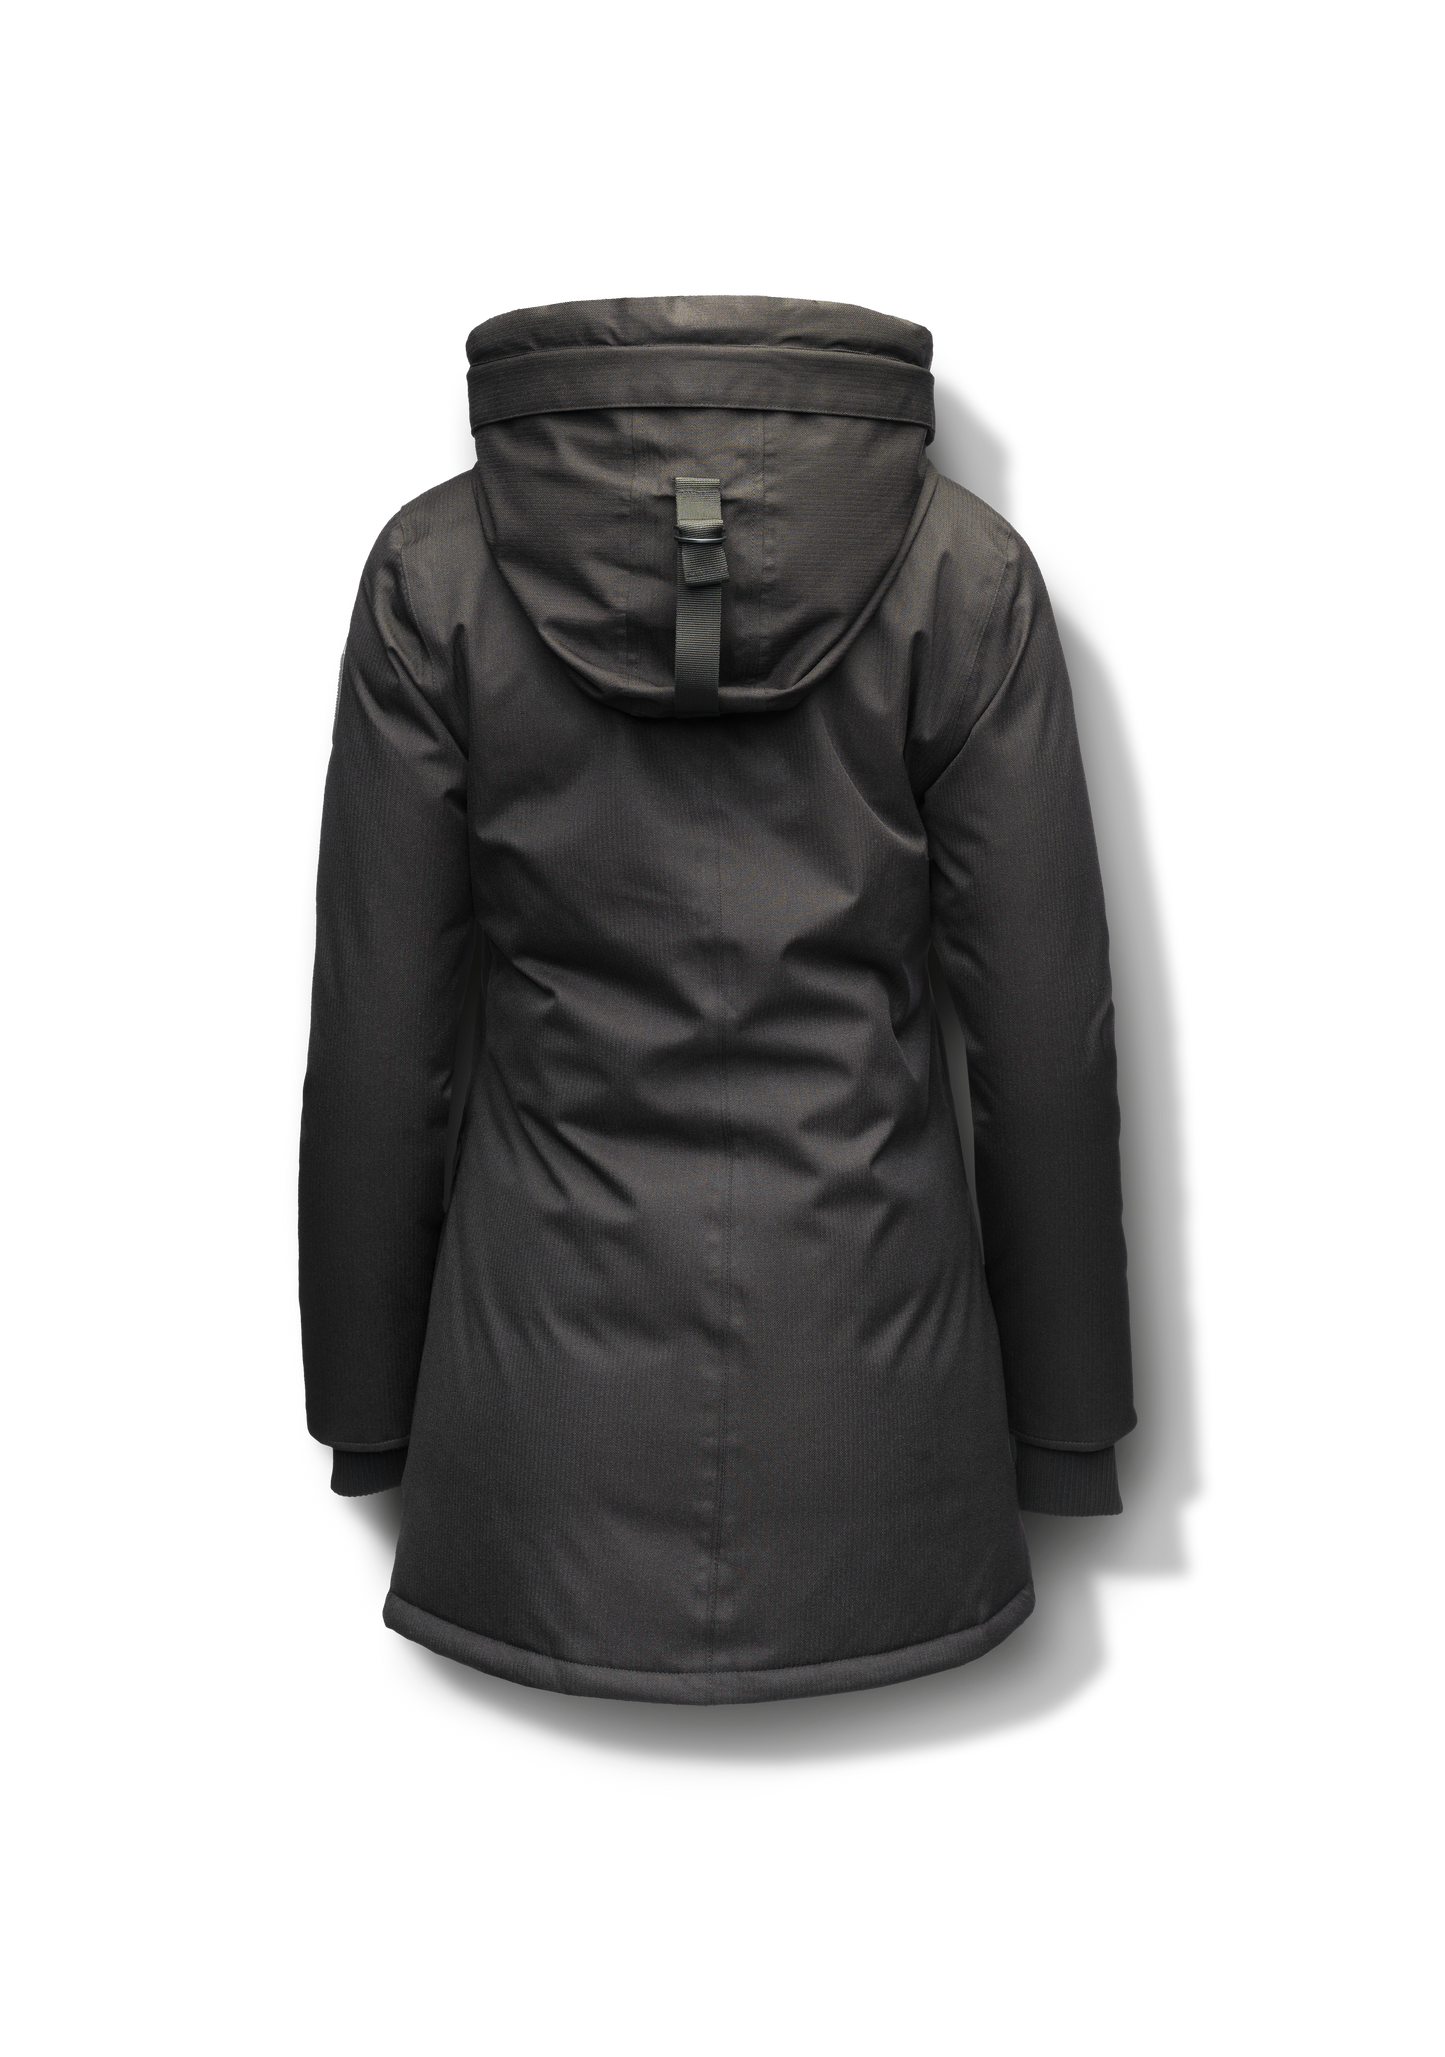 Women's down filled parka that sits just below the hip with a clean look and two hip patch pockets in BlackCarla Furless Ladies Parka in thigh length with Canadian Premium White Duck Down insulation, non-removable hood, centre-front zipper with magnetic closure wind flap, and four exterior pockets, in Black